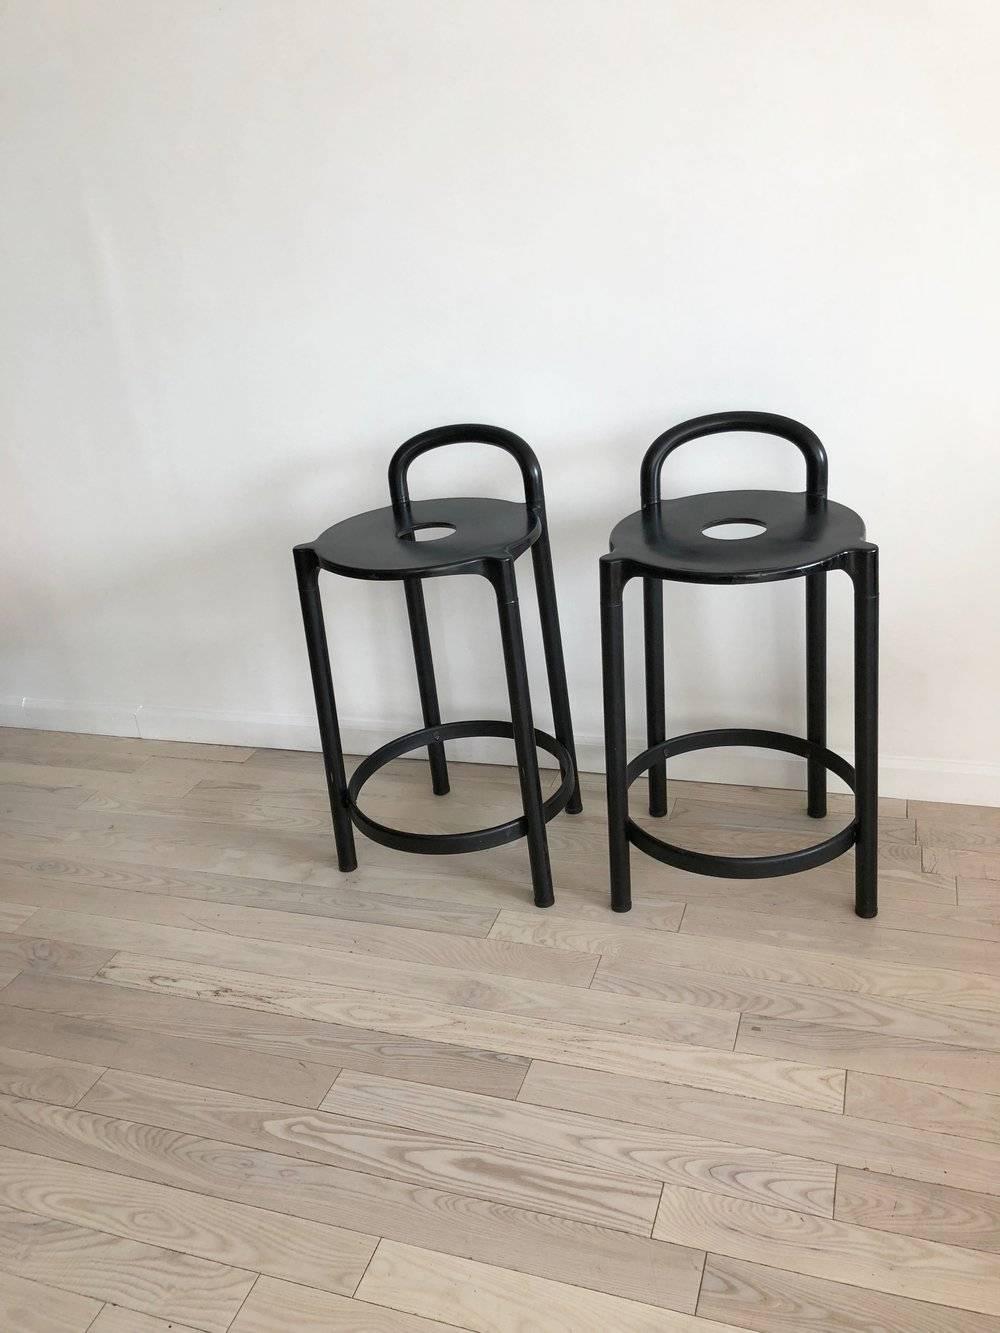 1979 pair of the Italian bar stool by Anna Castelli Ferrieri by Kartell. These guys are awesome. Sold as a pair. Plastic and metal.

Minor signs of use and scuffs from age. 

Measures: 16